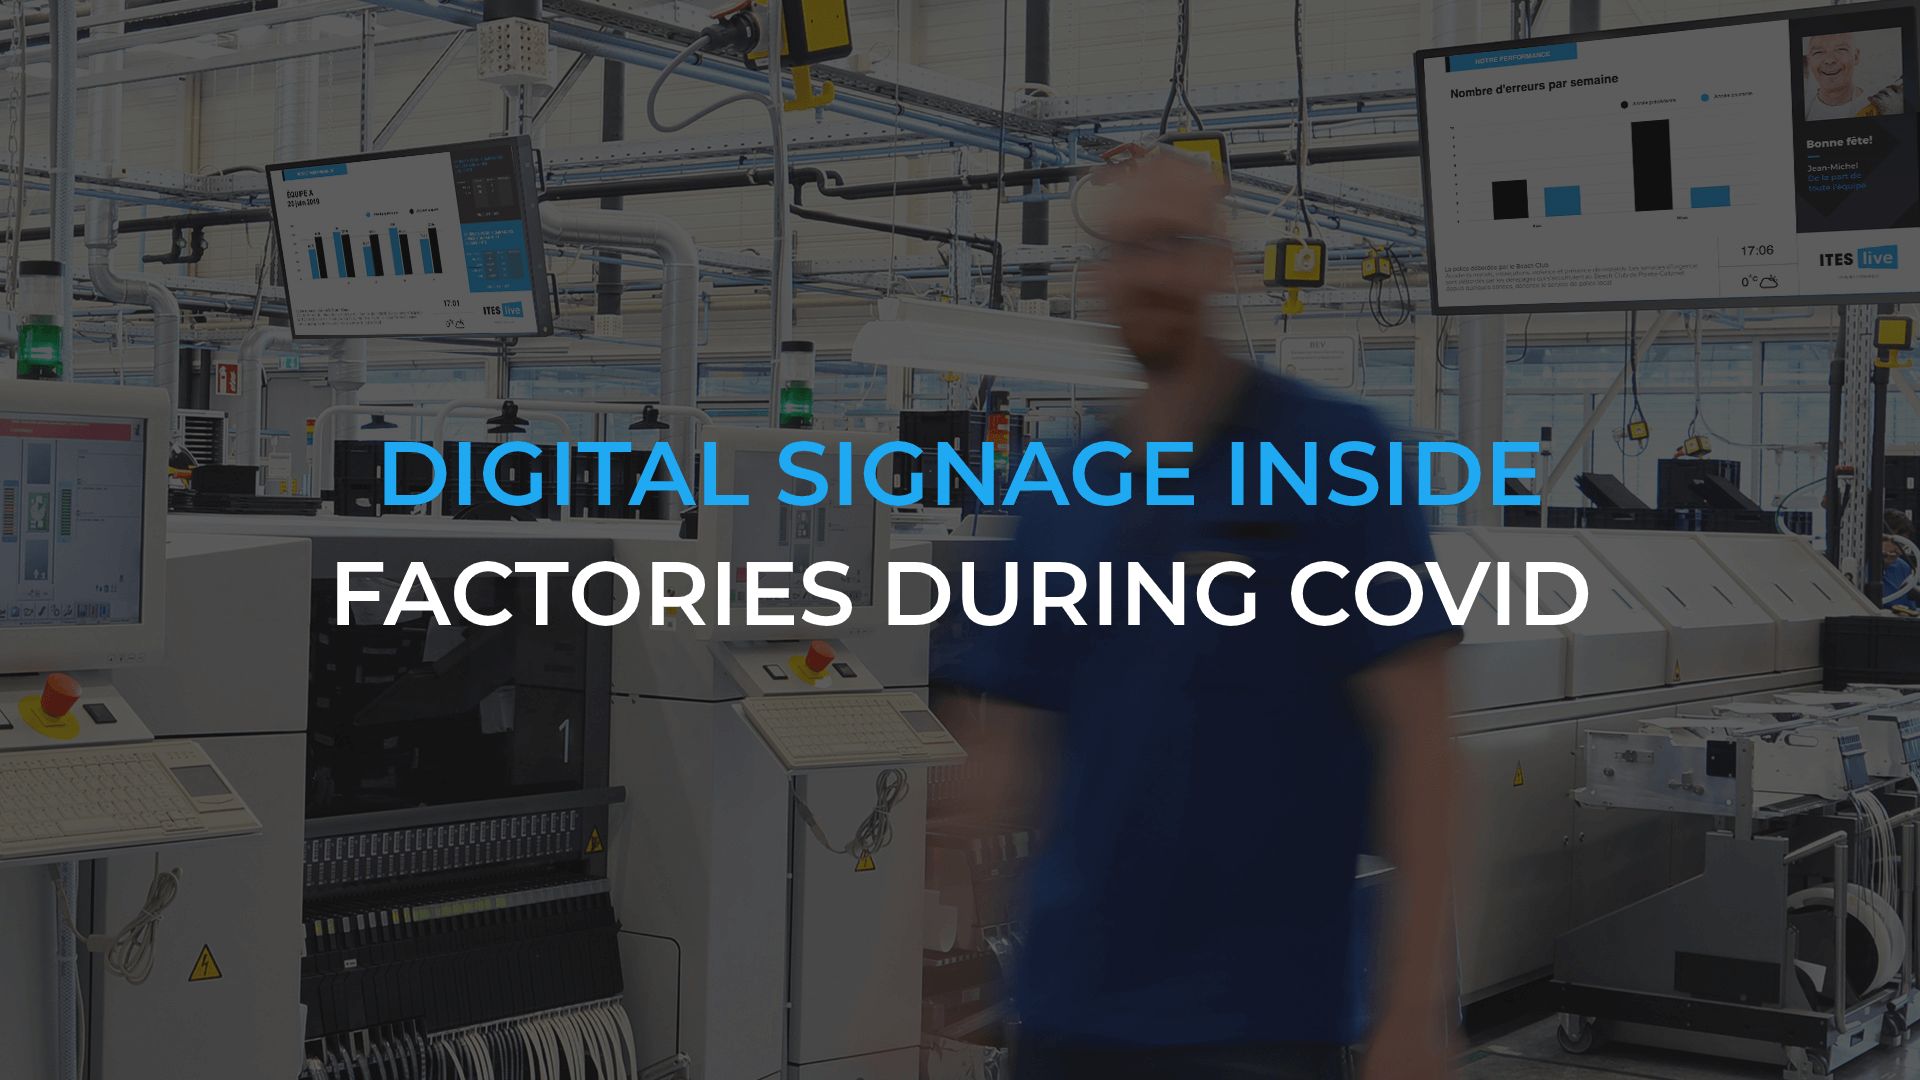 In these times of COVID, how can digital signage support employee health in factories?